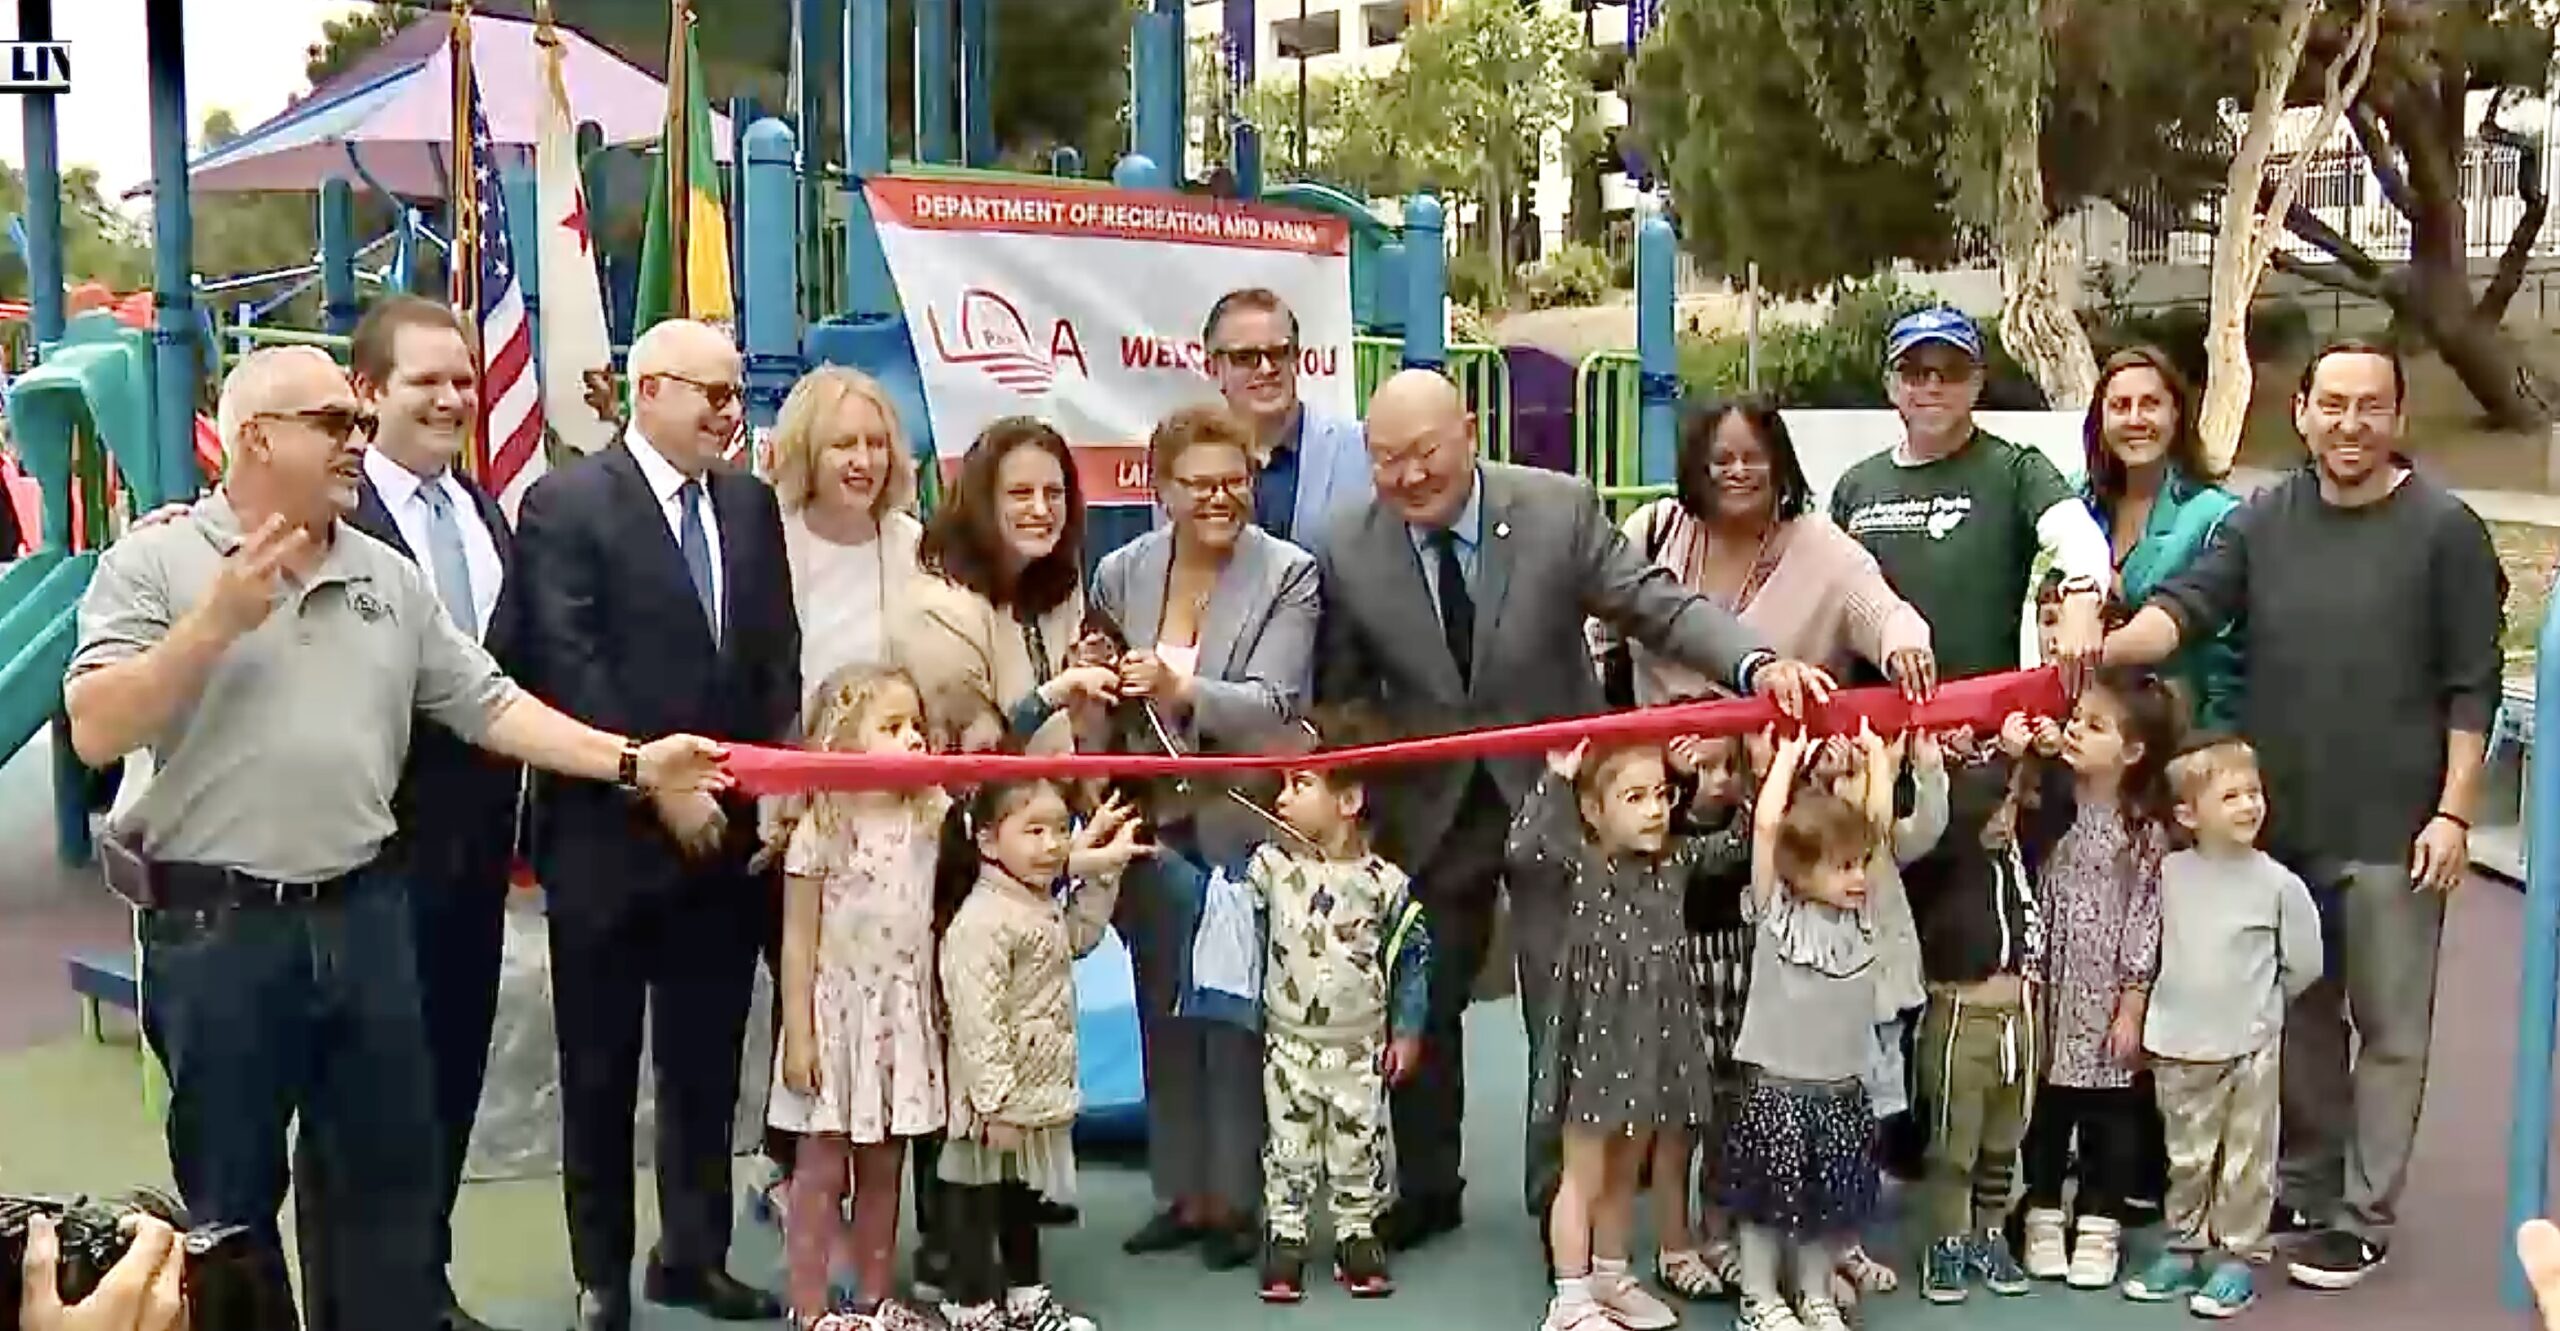 Pan Pacific Park Playground Reopens in Fairfax District After Being Destroyed by Arsonist Last Year